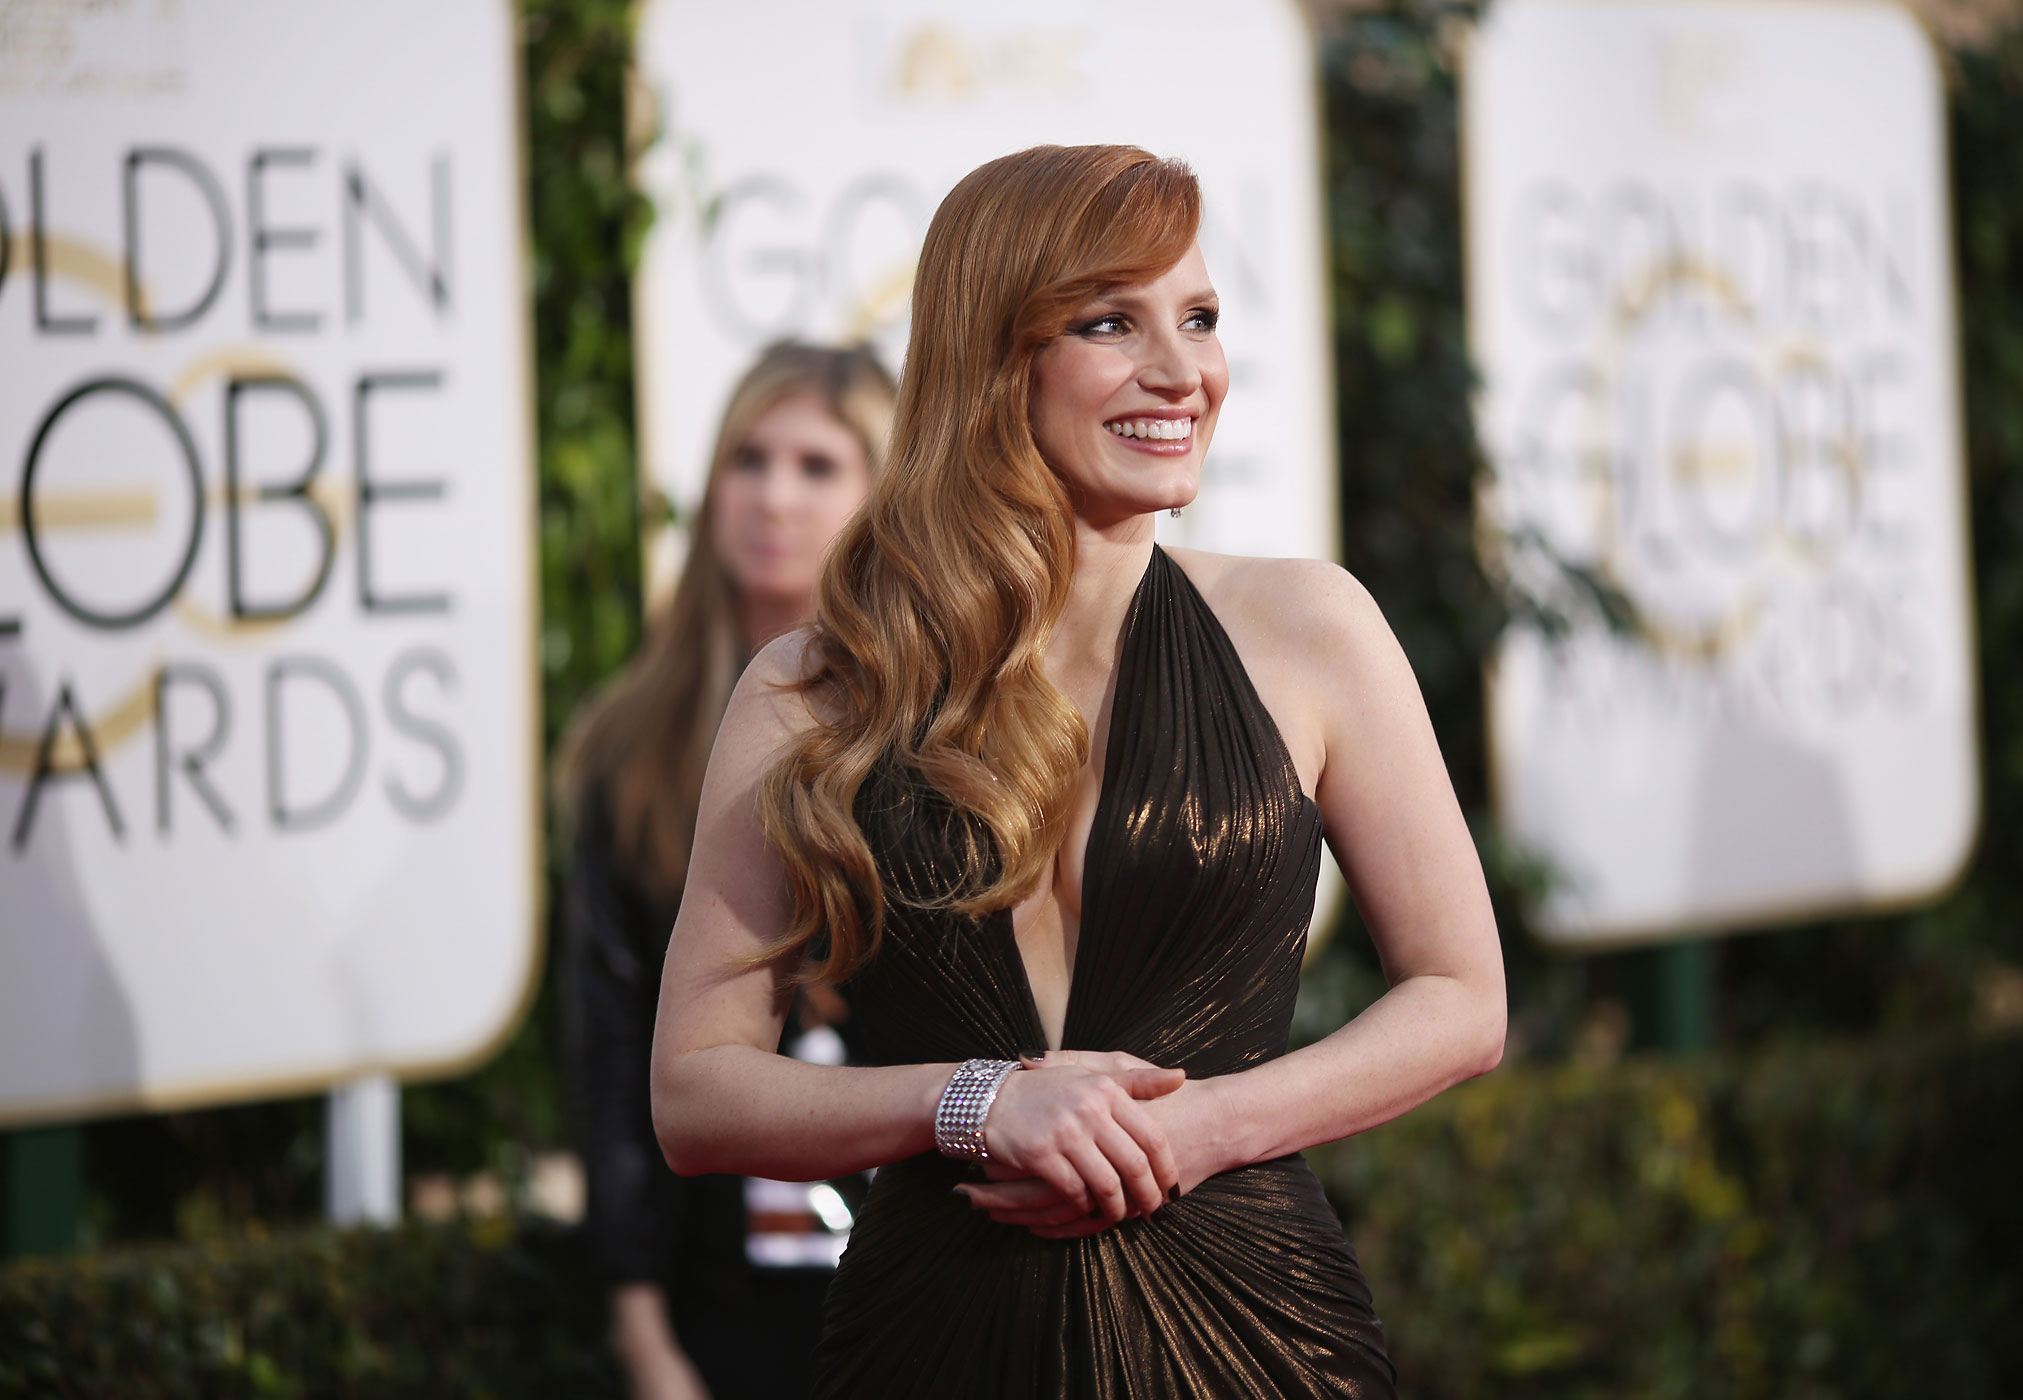 Jessica Chastain arrives to the 72nd Annual Golden Globe Awards held at the Beverly Hilton Hotel on Jan. 11, 2015.